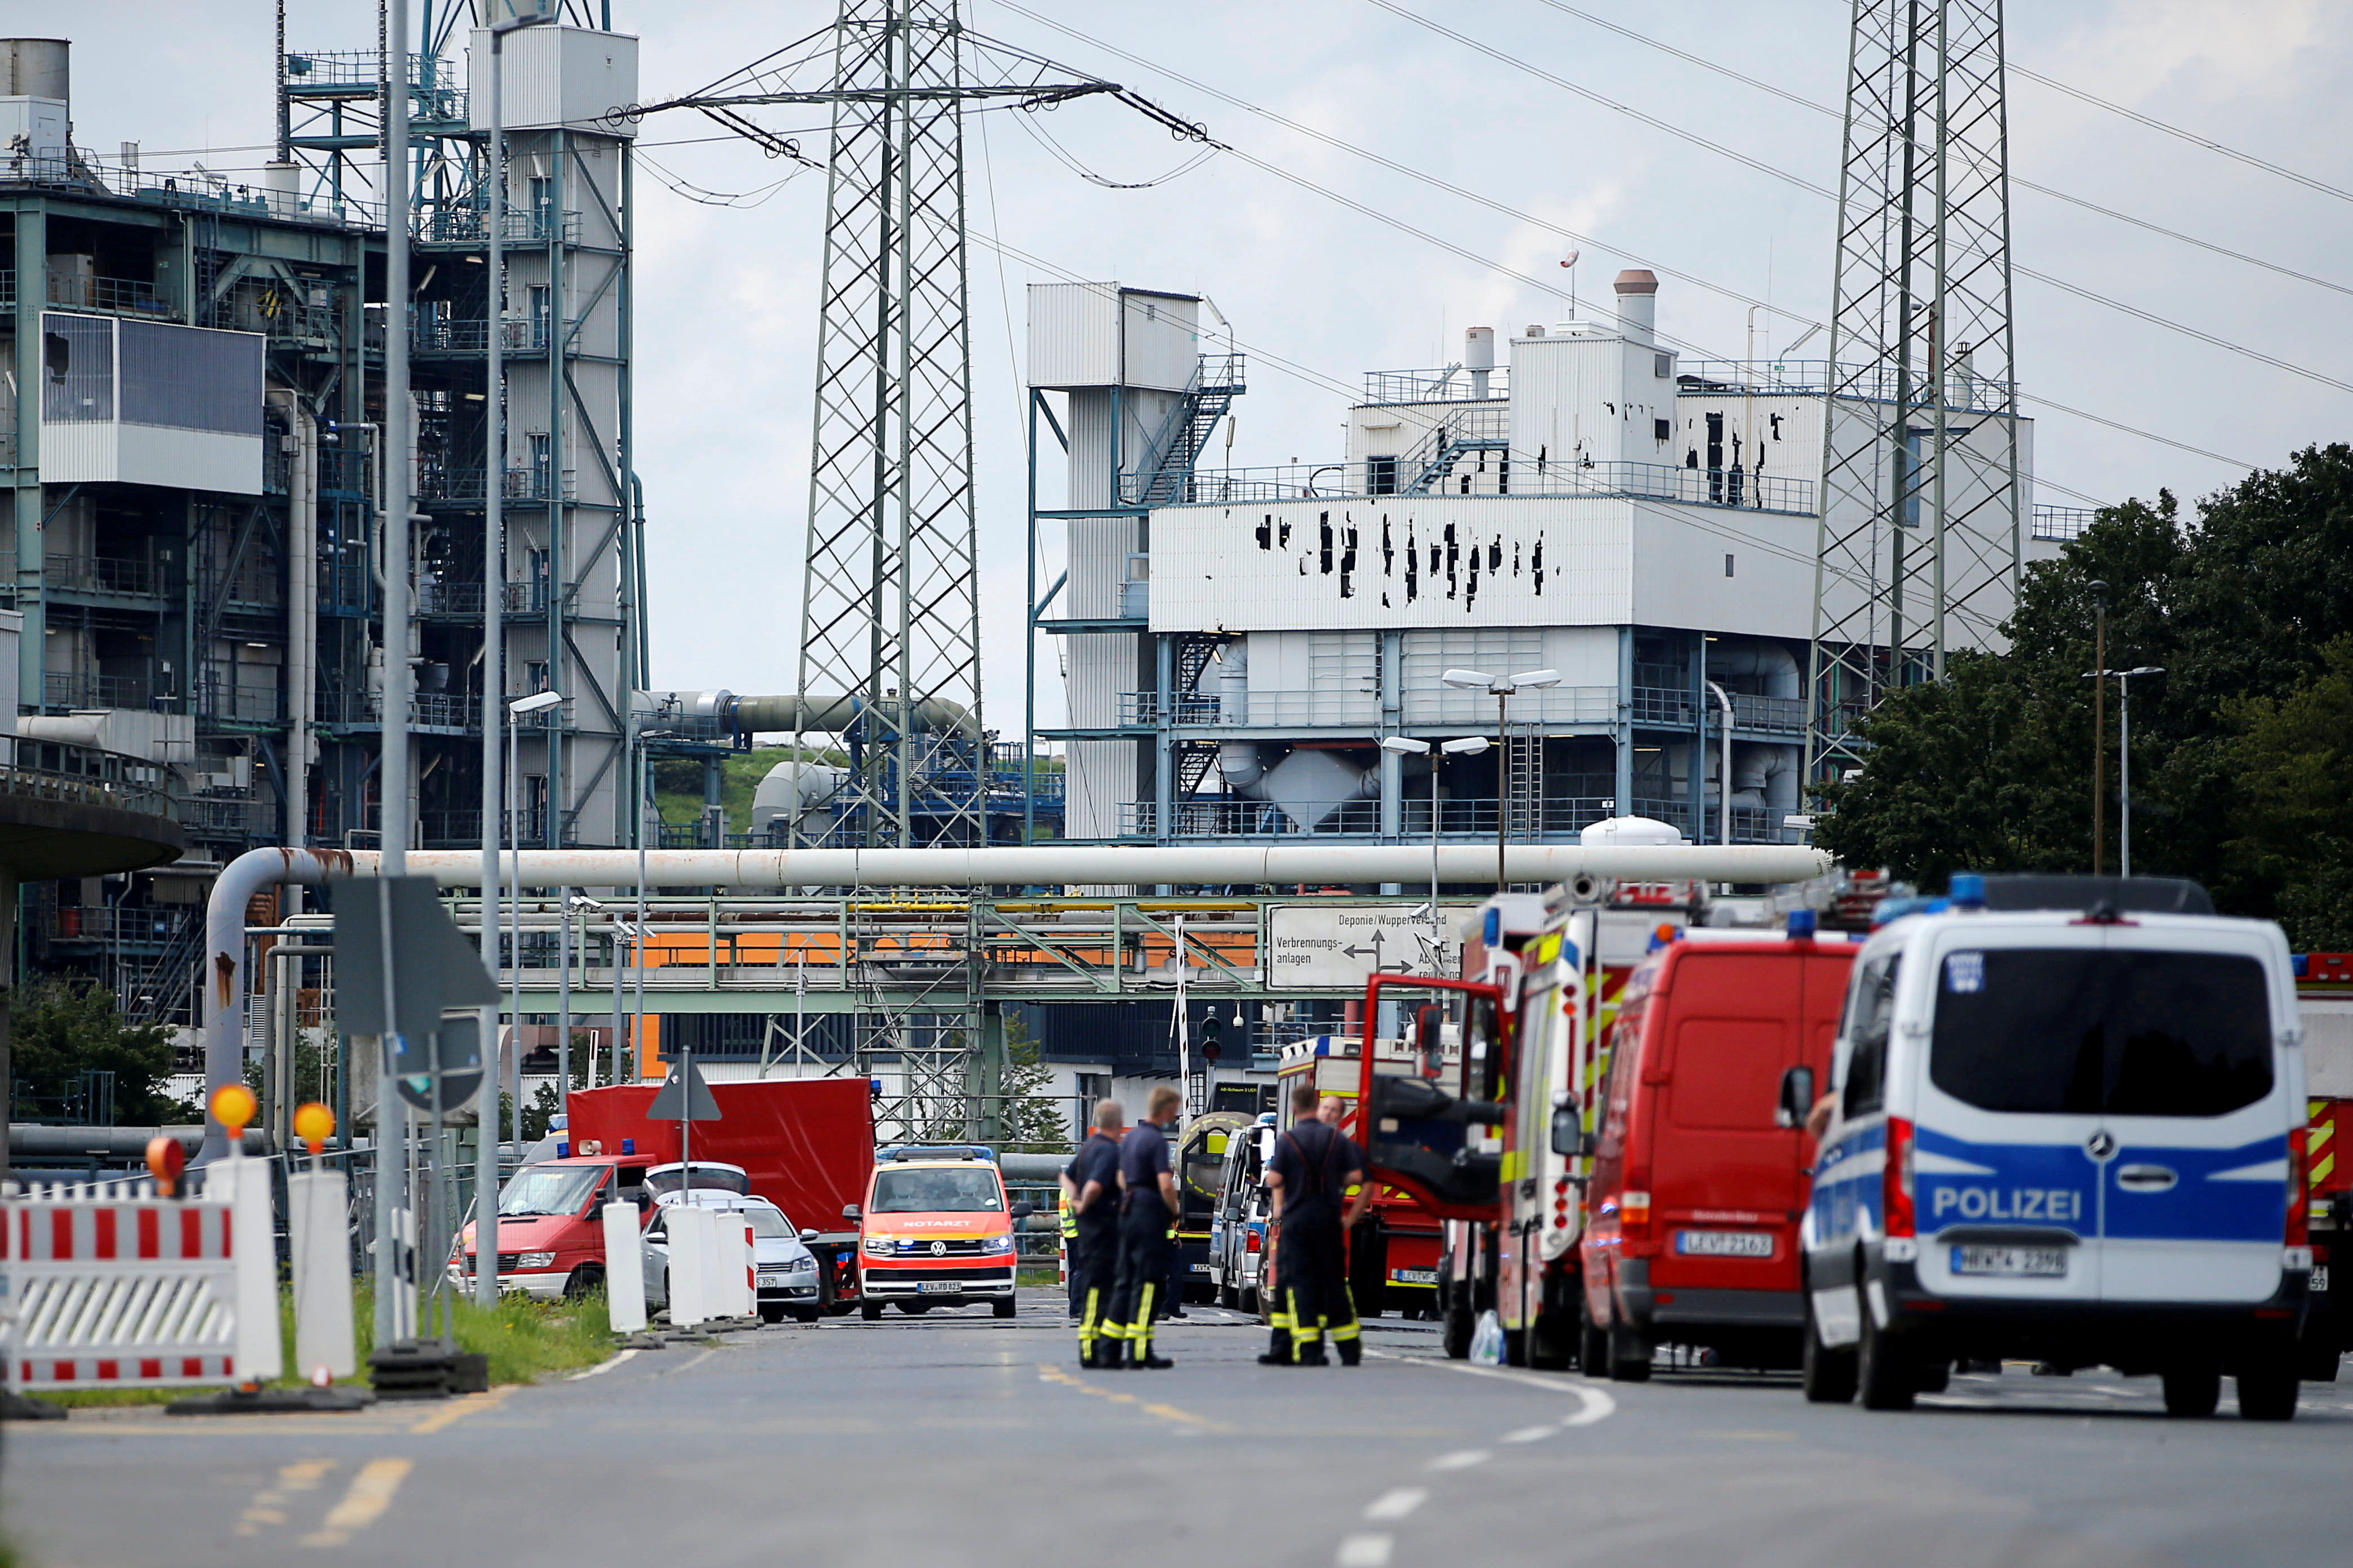 image Three charged over deadly chemicals blast in Germany